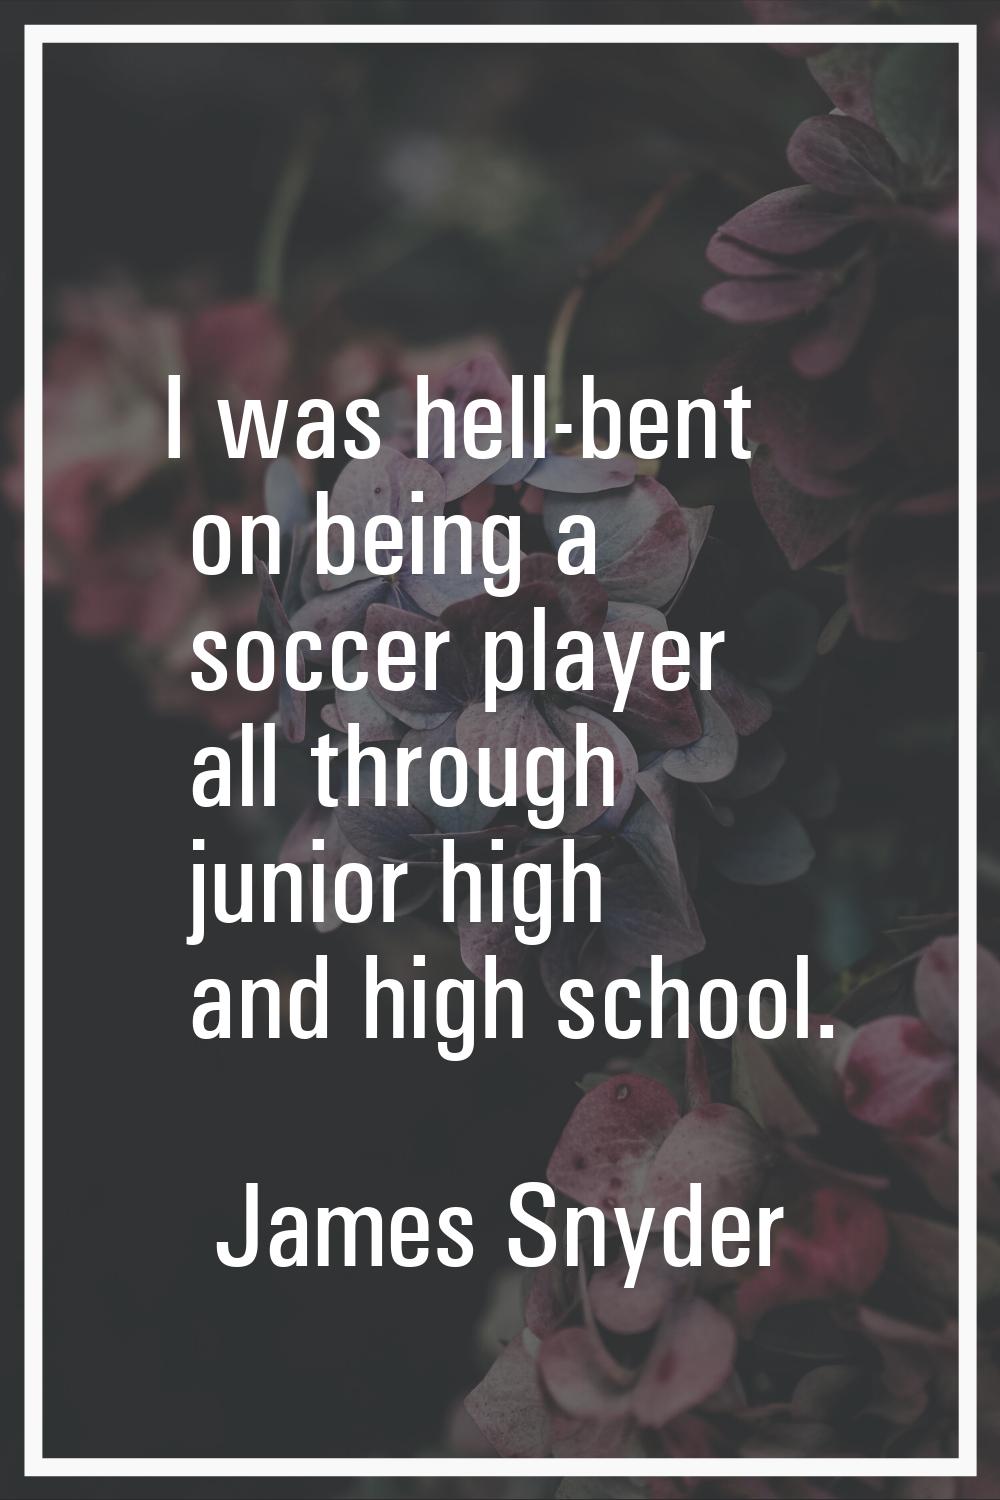 I was hell-bent on being a soccer player all through junior high and high school.